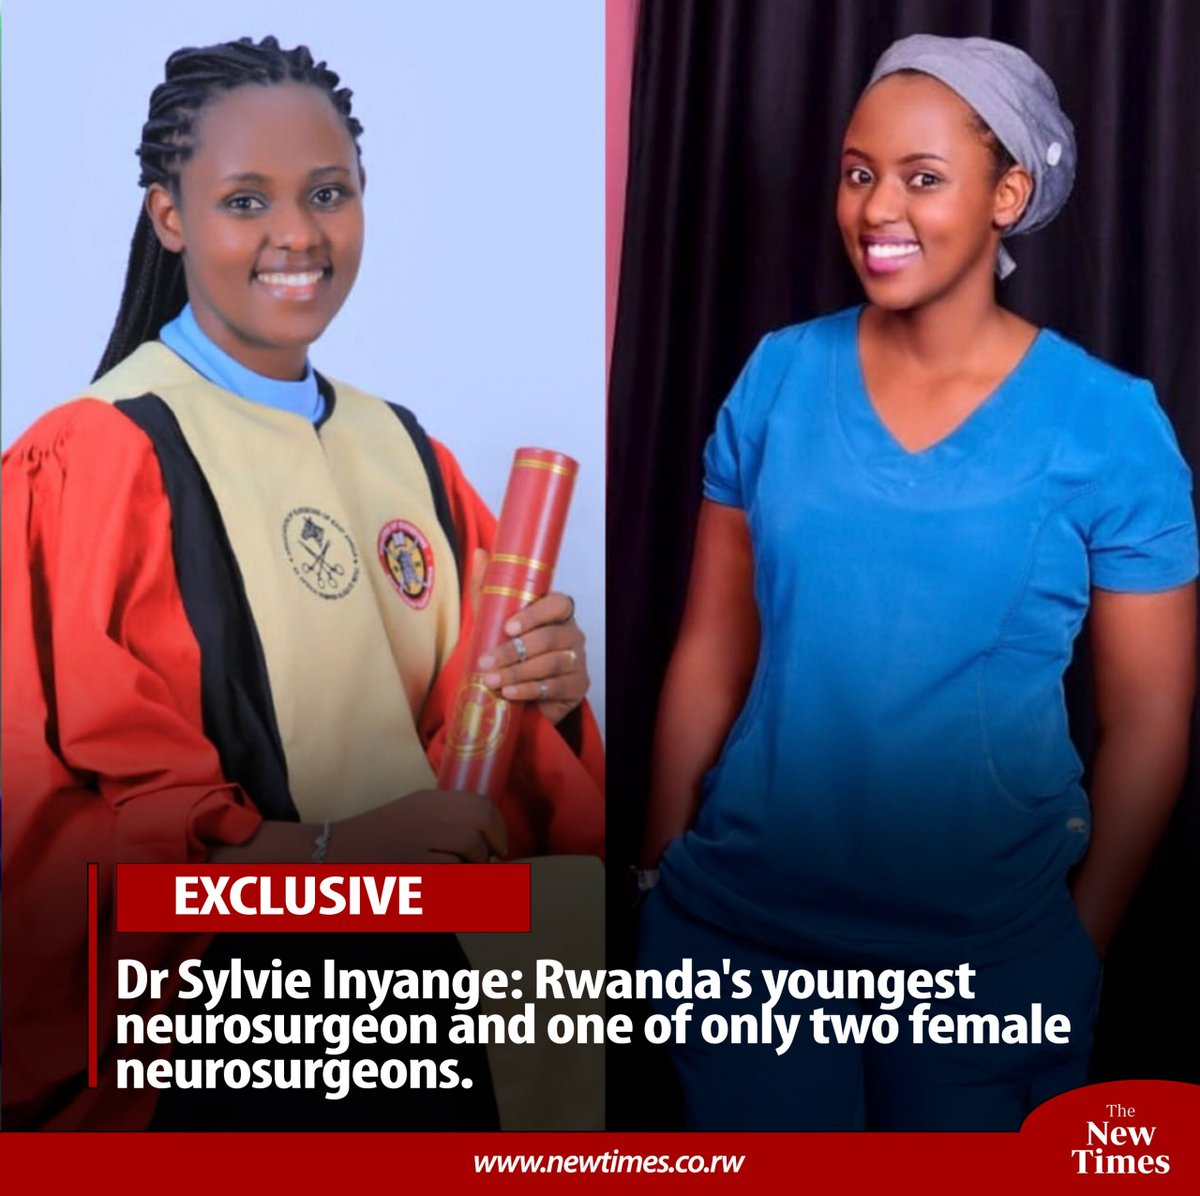 Dr Sylvie Inyange, 33, the youngest neurosurgeon in #Rwanda and only of the two female neurosurgeons in the country. She spoke exclusively to TNT about her life-saving work. READ: buff.ly/3VamPo2